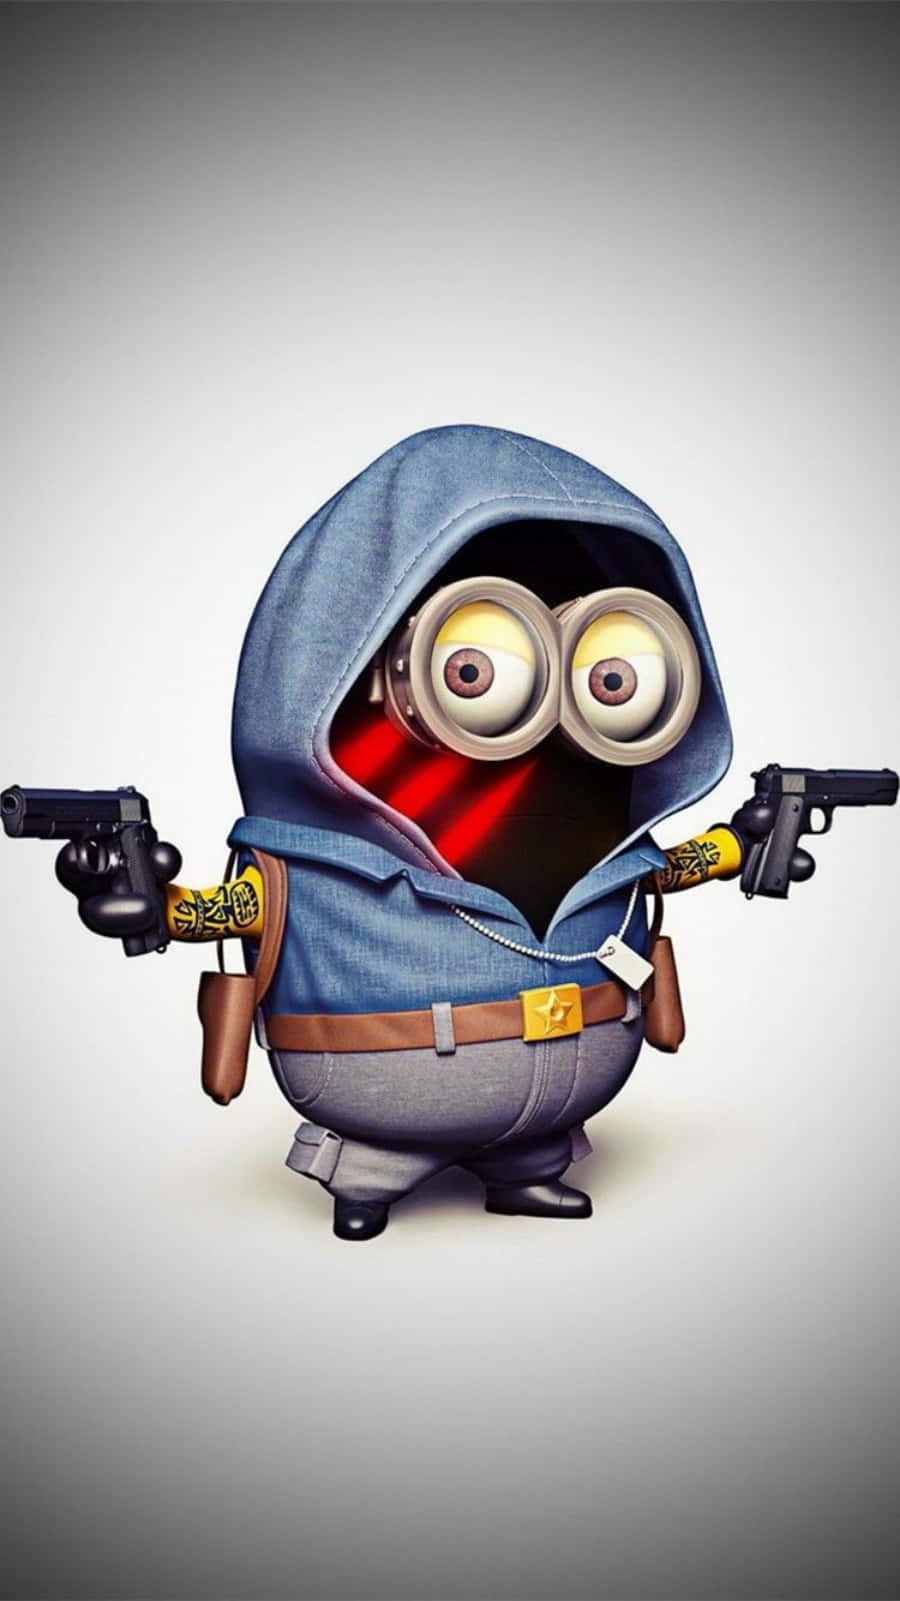 Gangster Despicable Me Minion Iphone Wallpaper